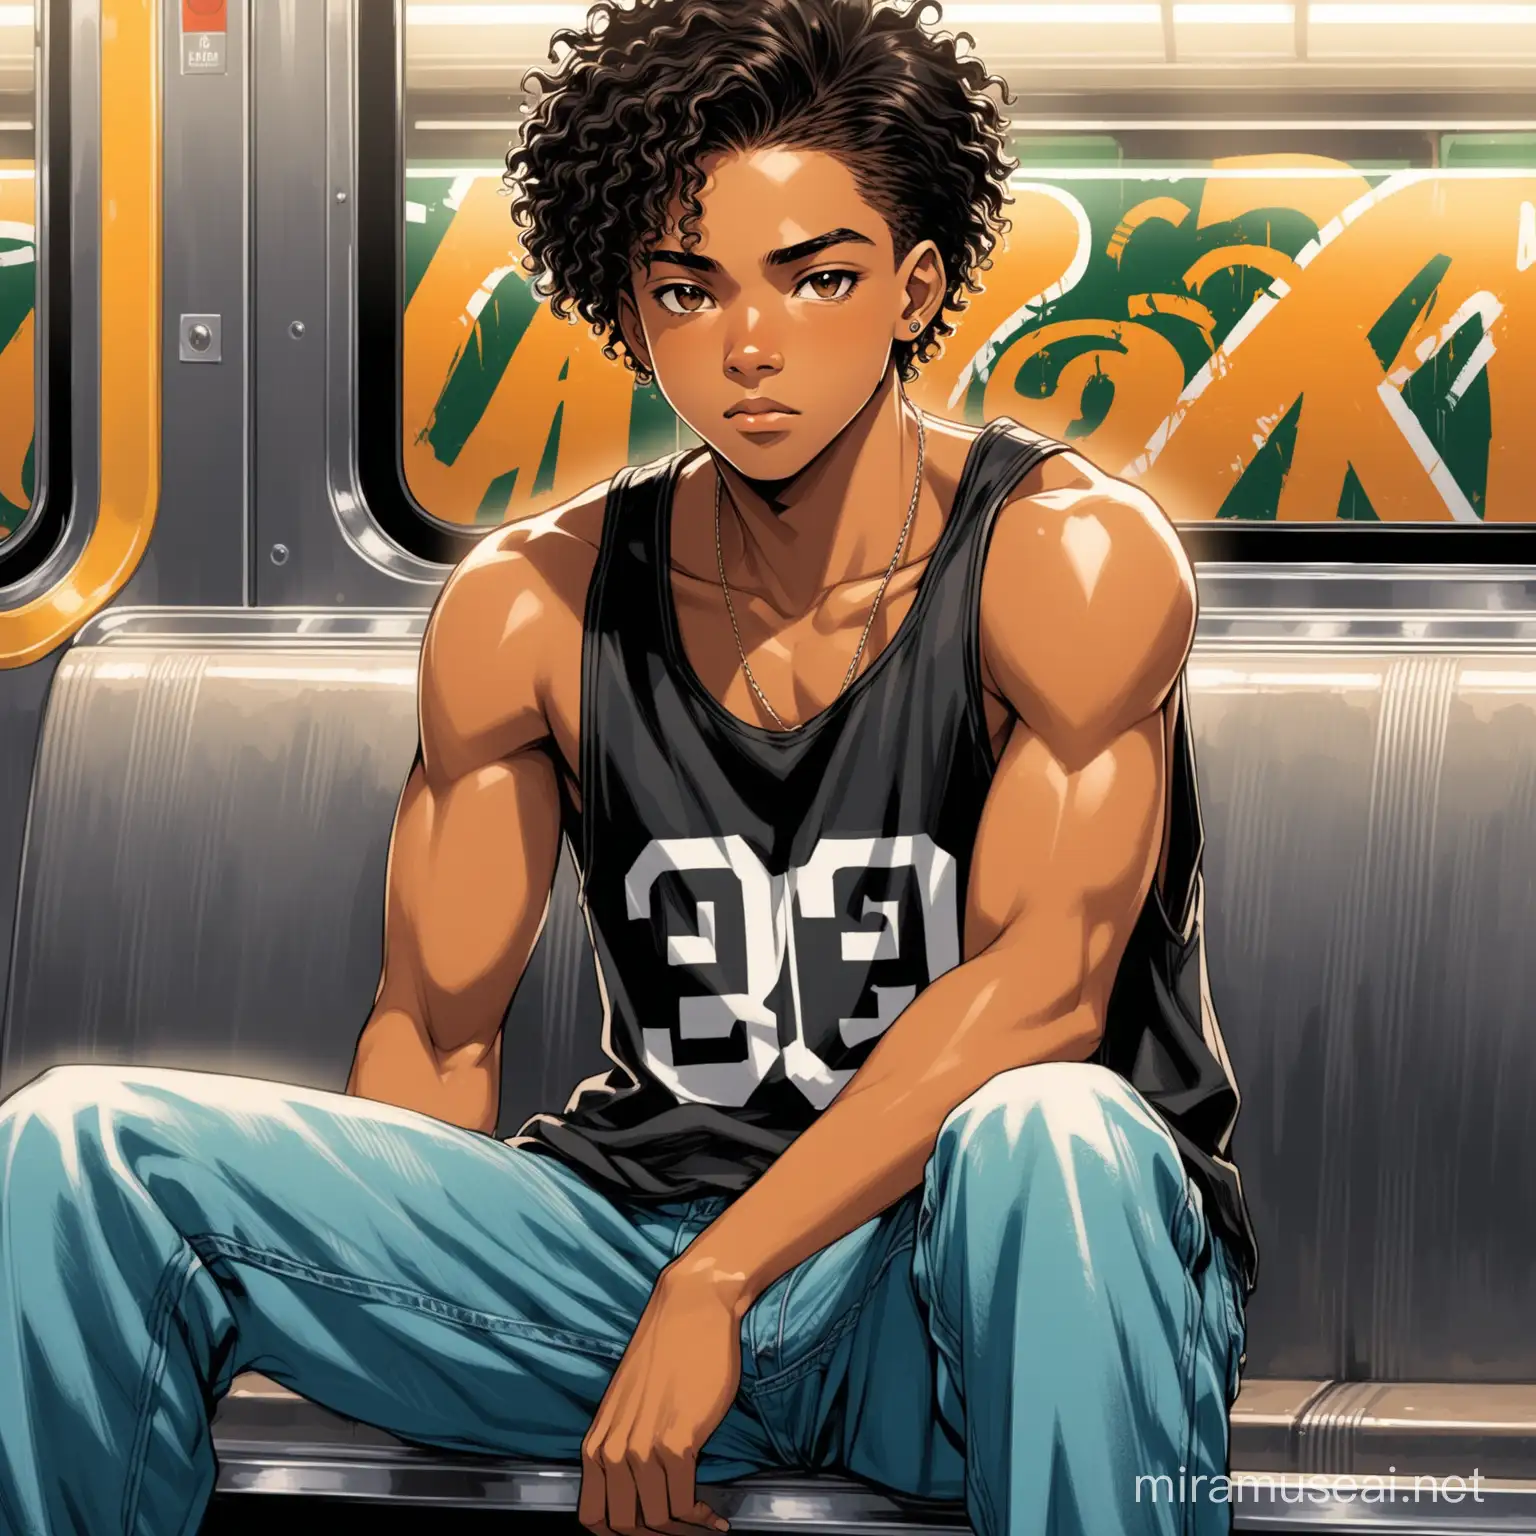 Urban Youth in 1990s New York Subway African American Teenager in Cinematic SemiRealism